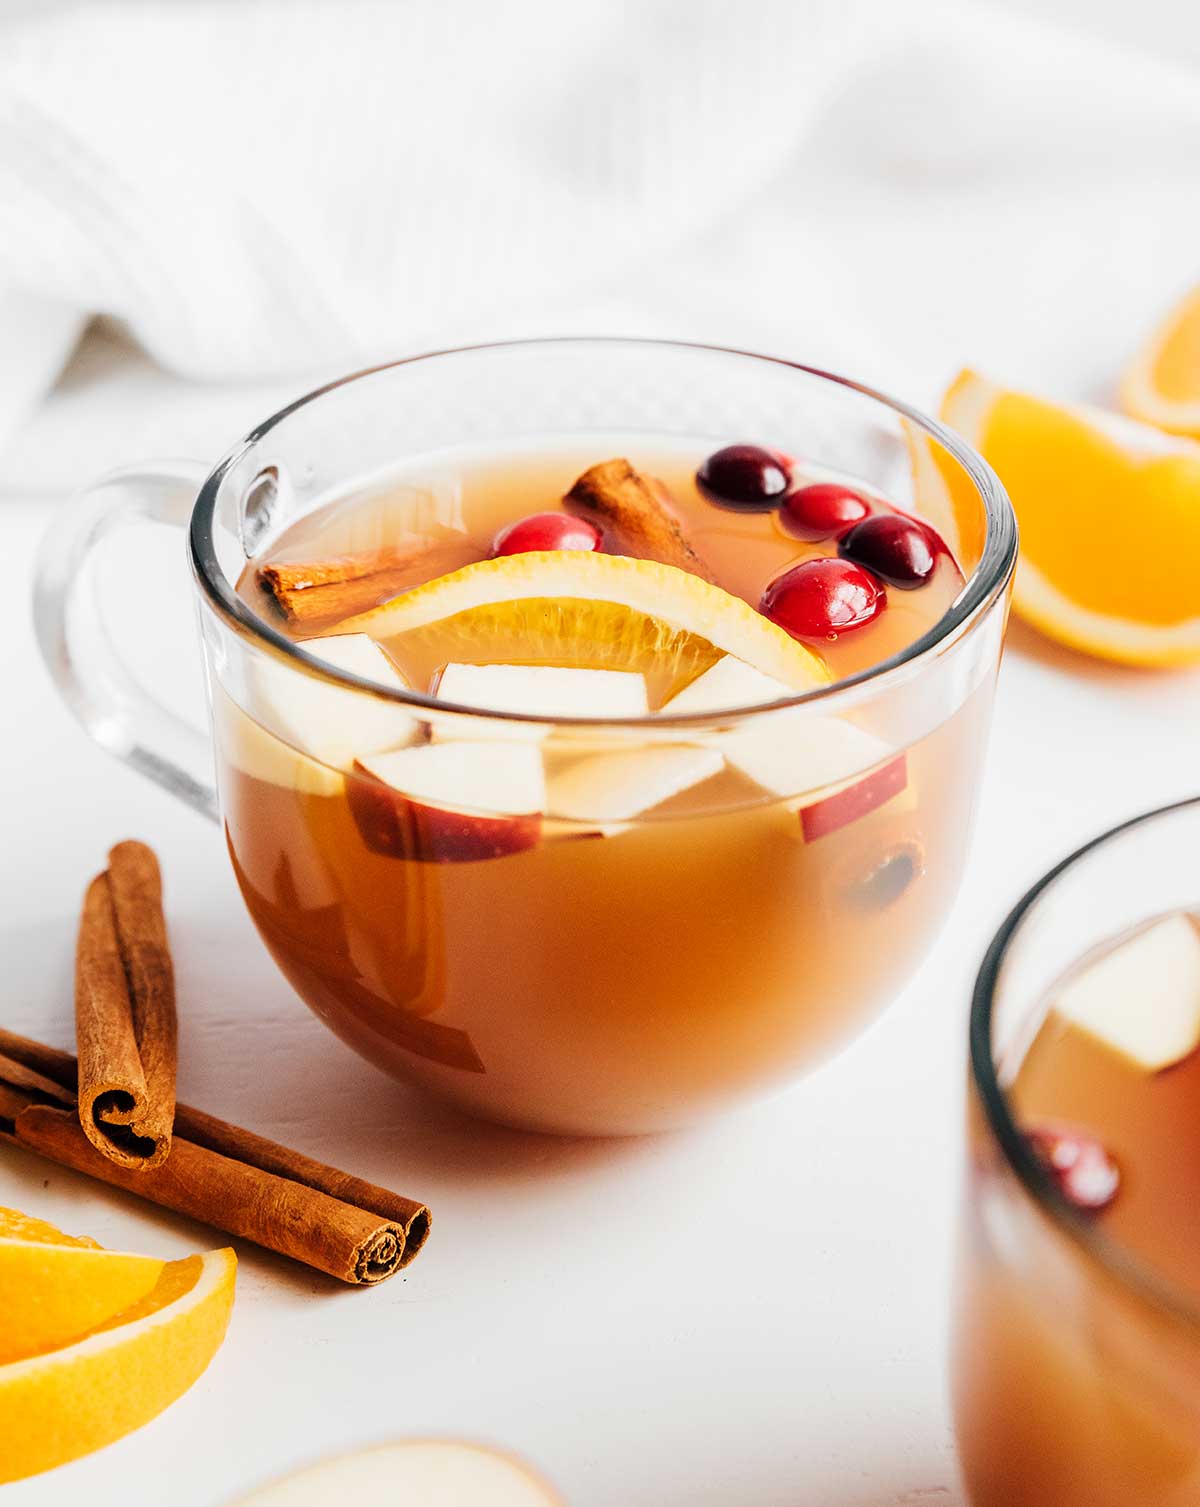 A glass of homemade apple cider garnished with cinnamon sticks, cranberries, and chopped fruit